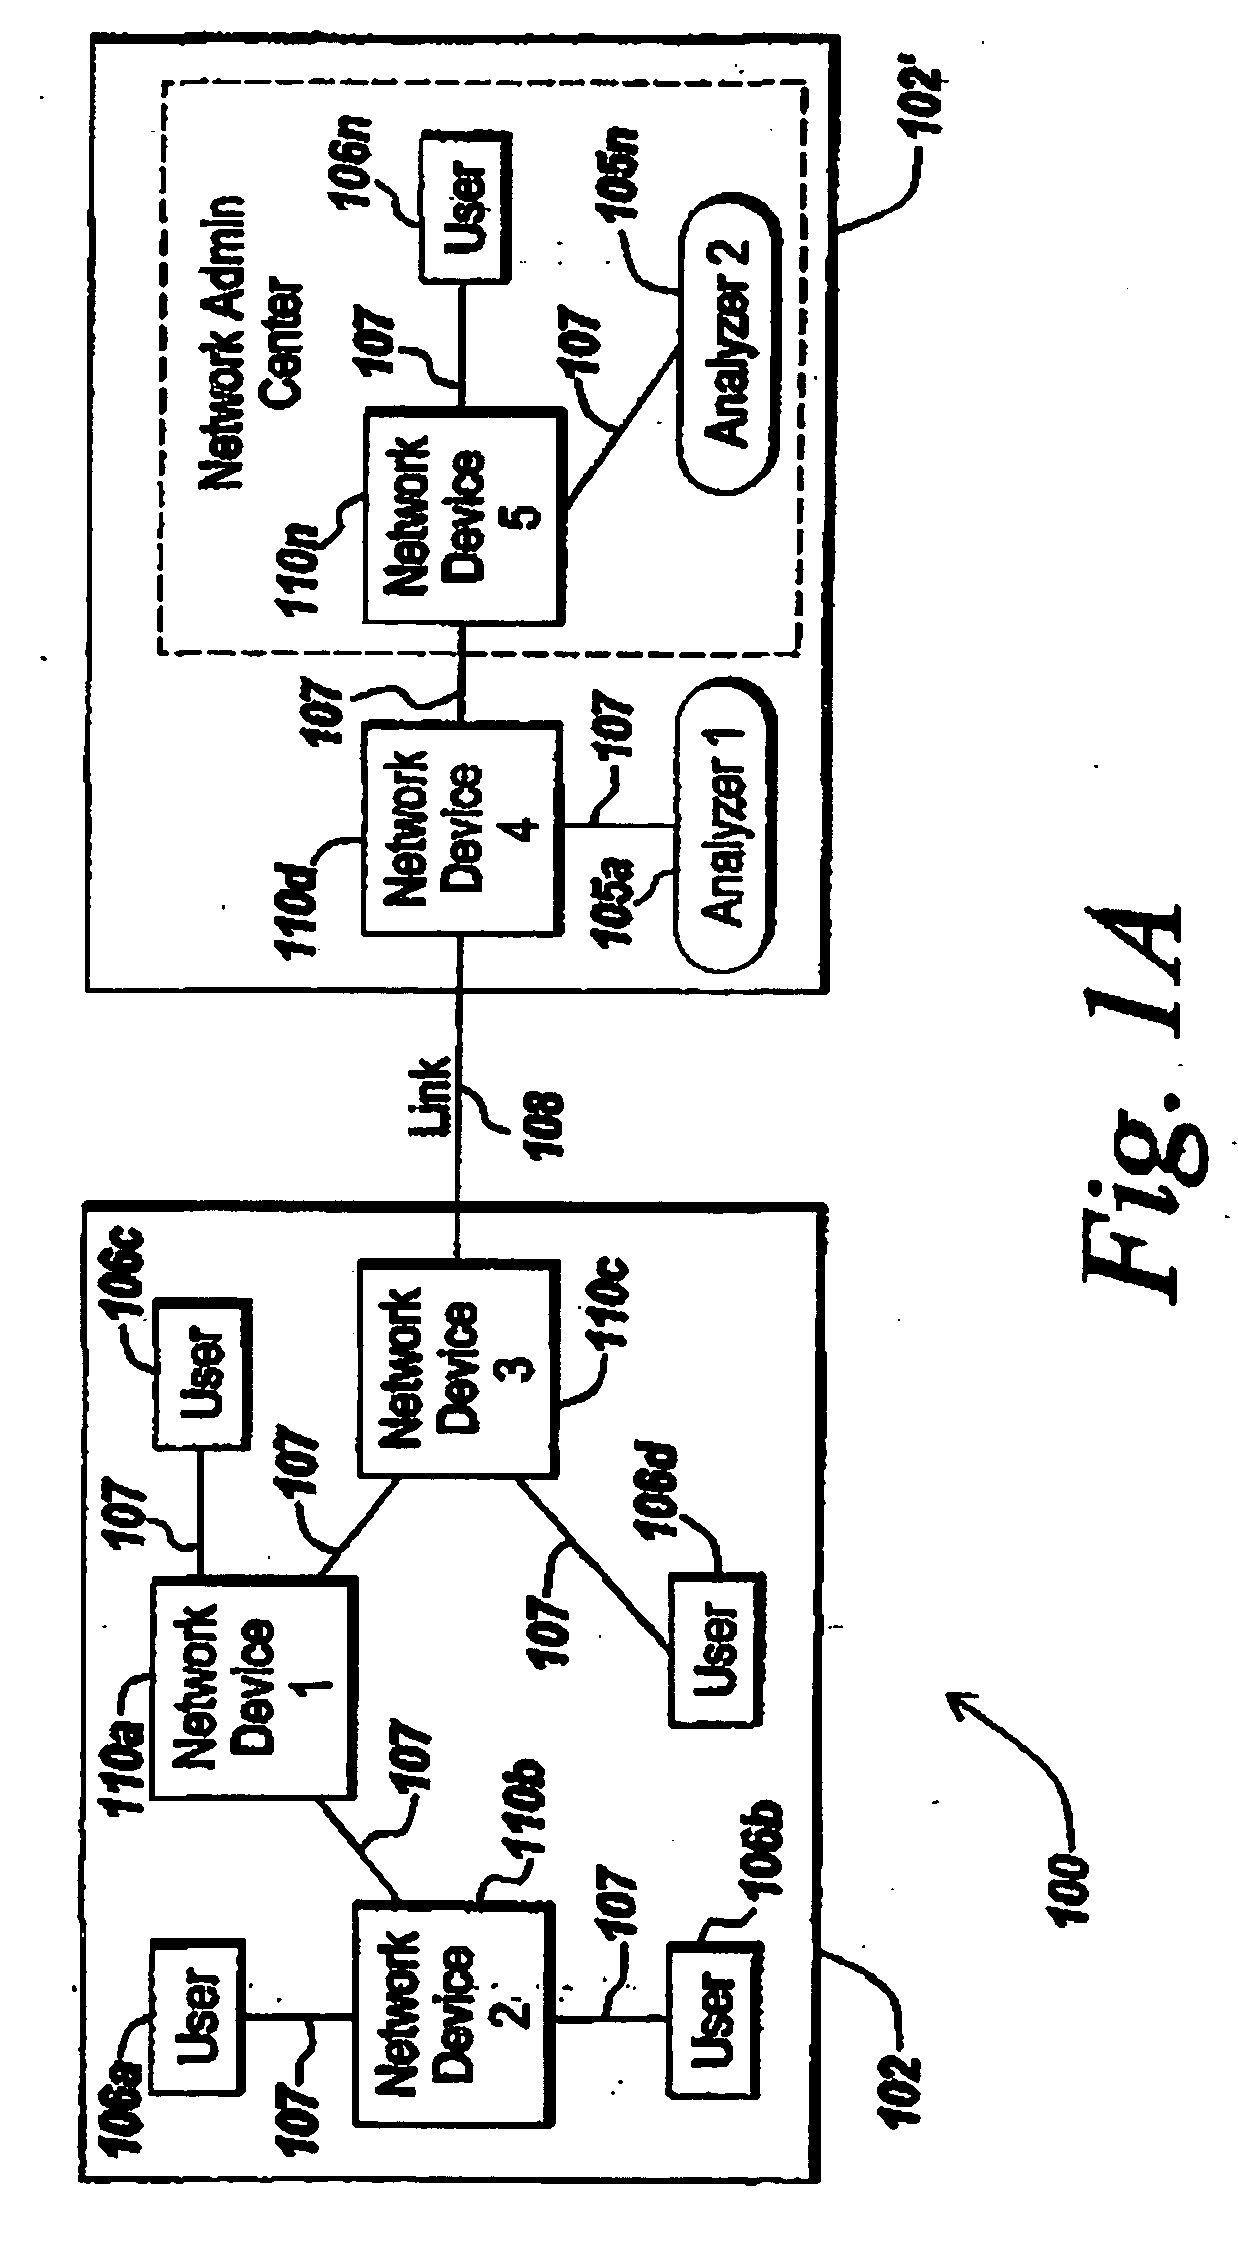 System, method and apparatus for traffic mirror setup, service and security in communication networks